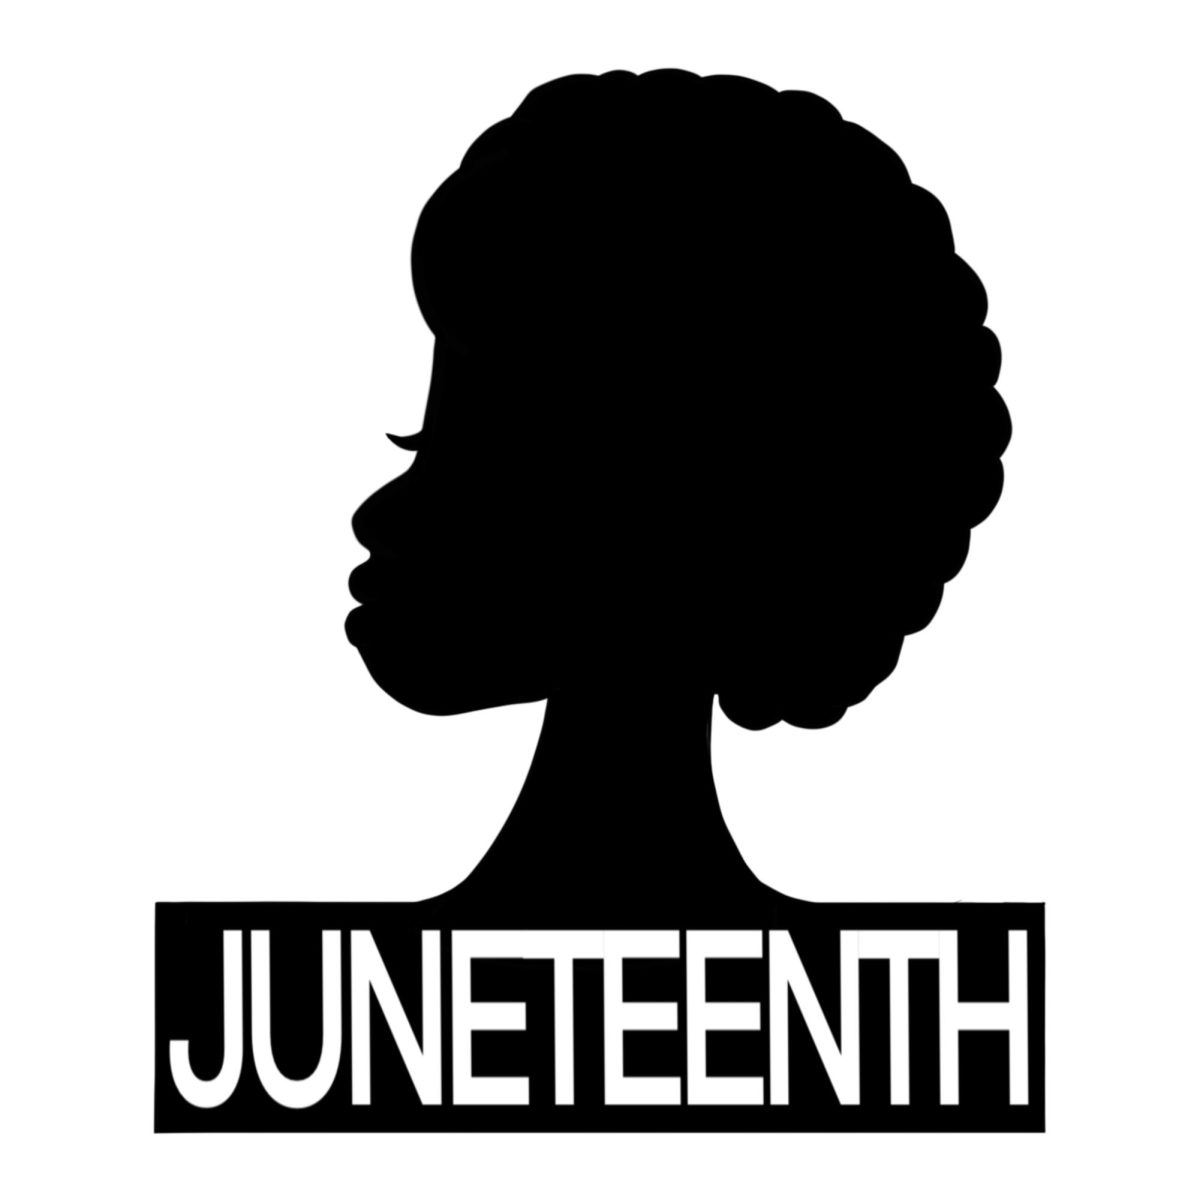 Juneteenth is Far More than Just a Holiday